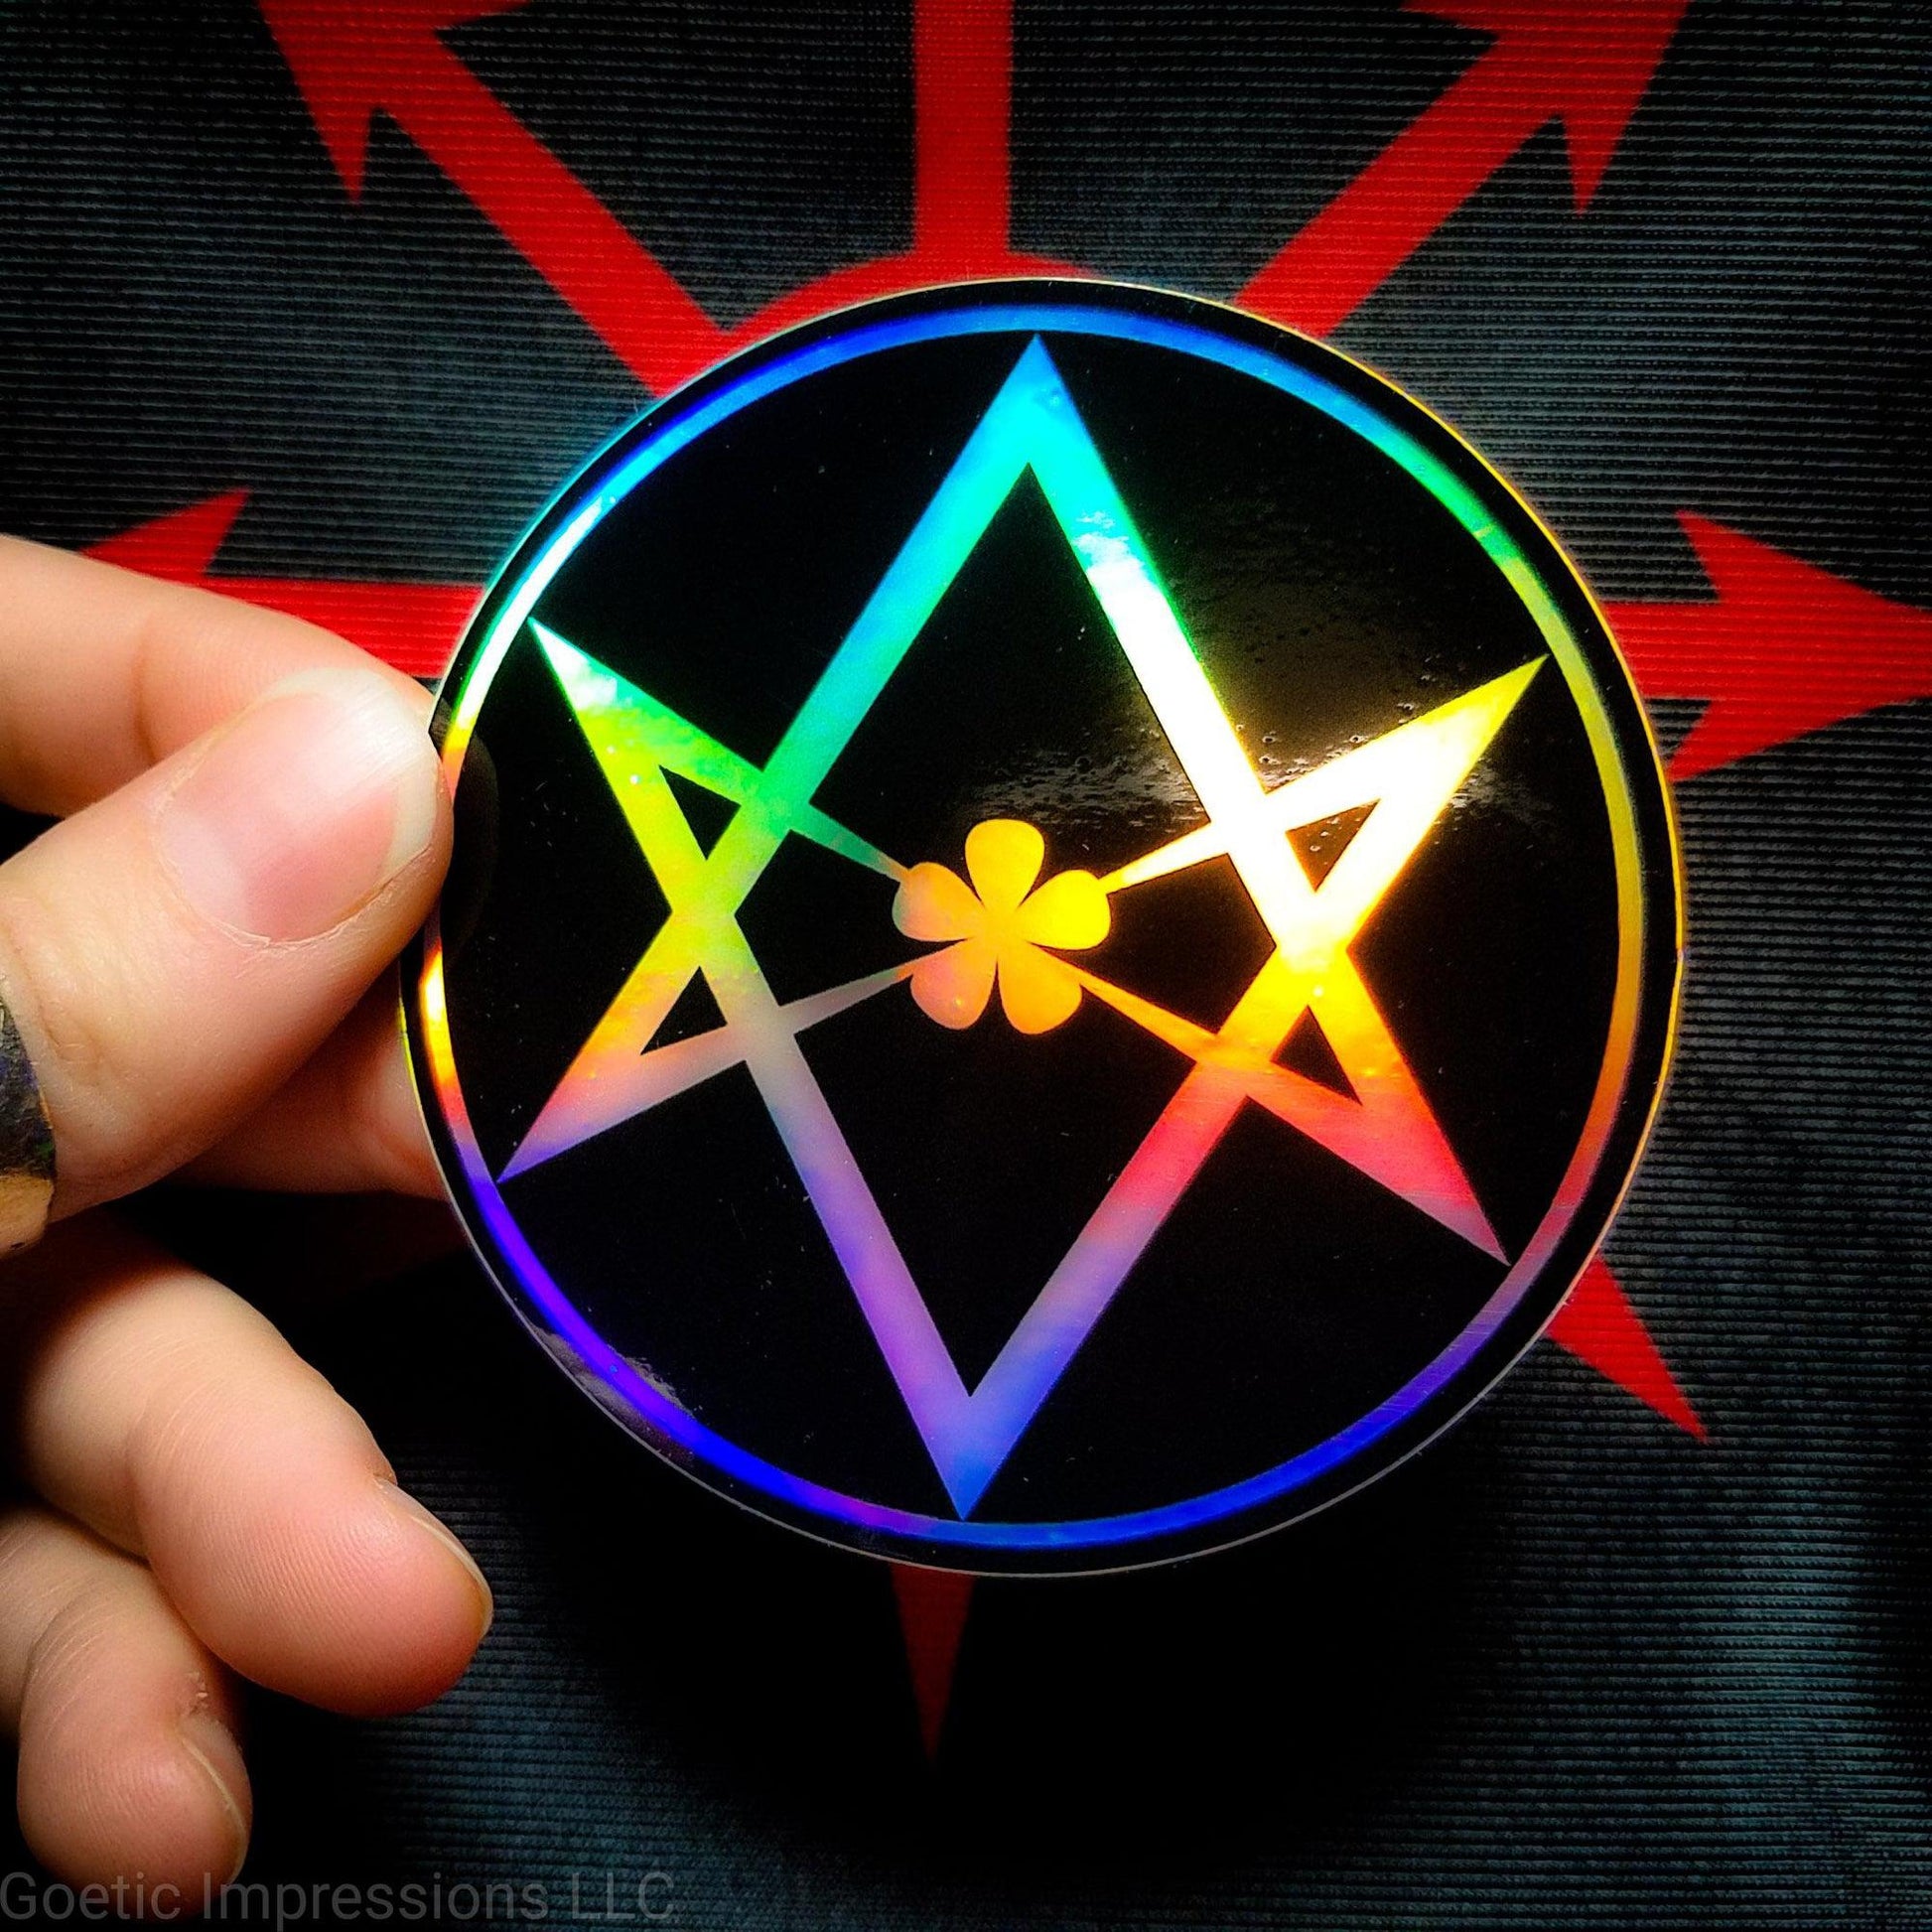 A hand holding a three inch circular holographic sticker. The sticker has a black background and a white symbol featuring the Unicursal Hexagram with a flower petal in the center. The holographic paper shines in a wide arrange of multicolors when the light catches it.